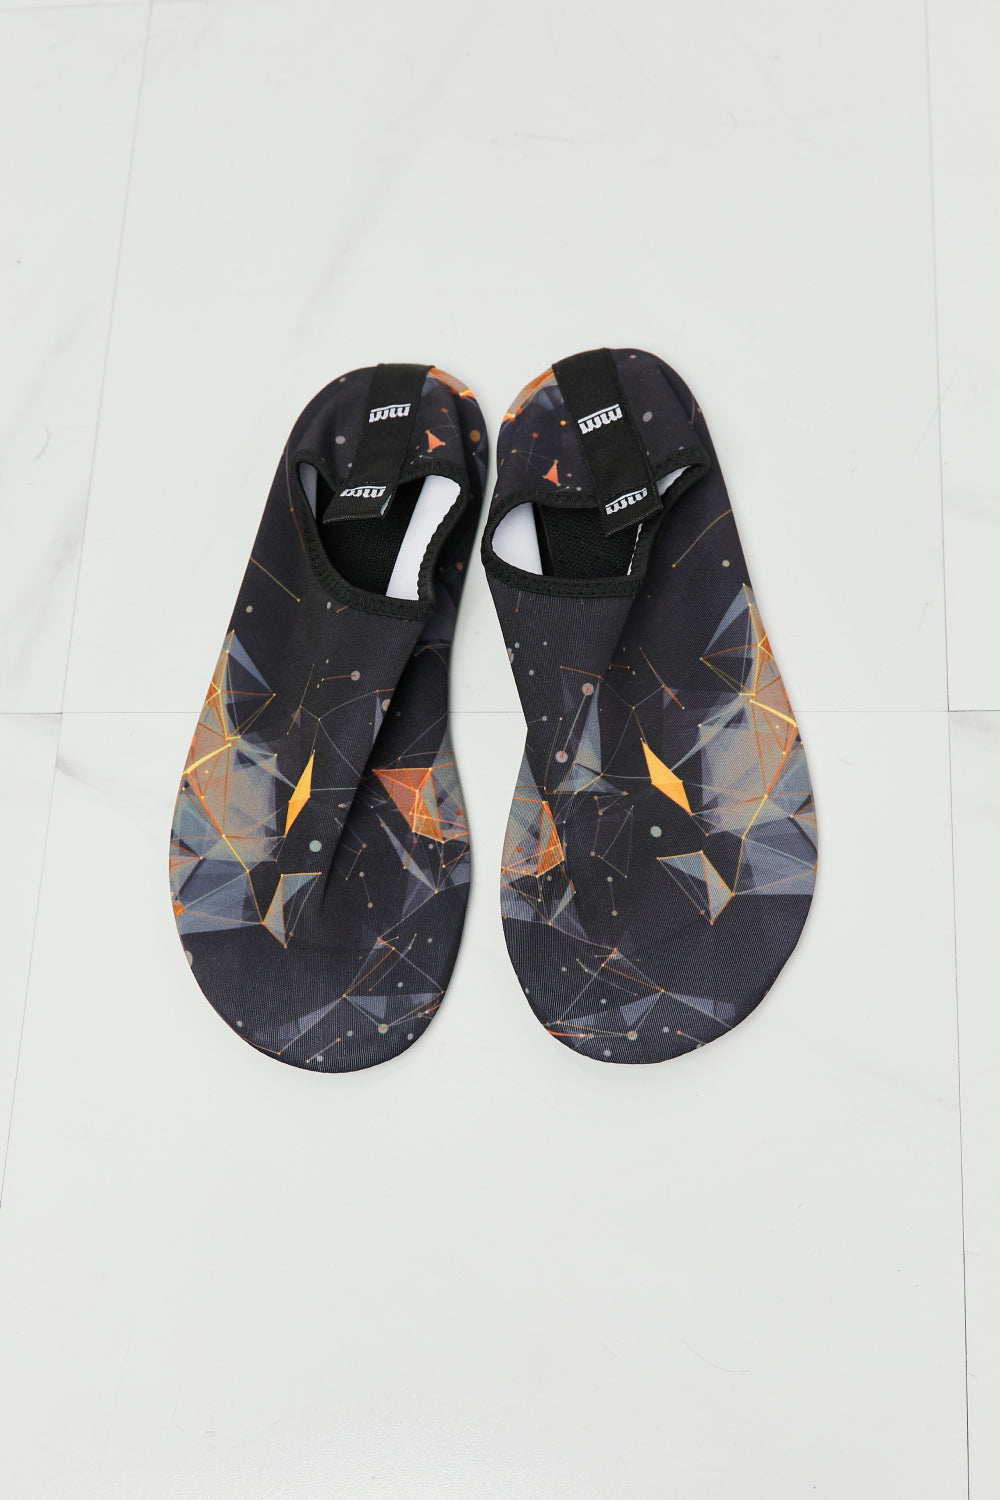 MMshoes On The Shore Water Shoes in Black/Orange  Sunset and Swim   